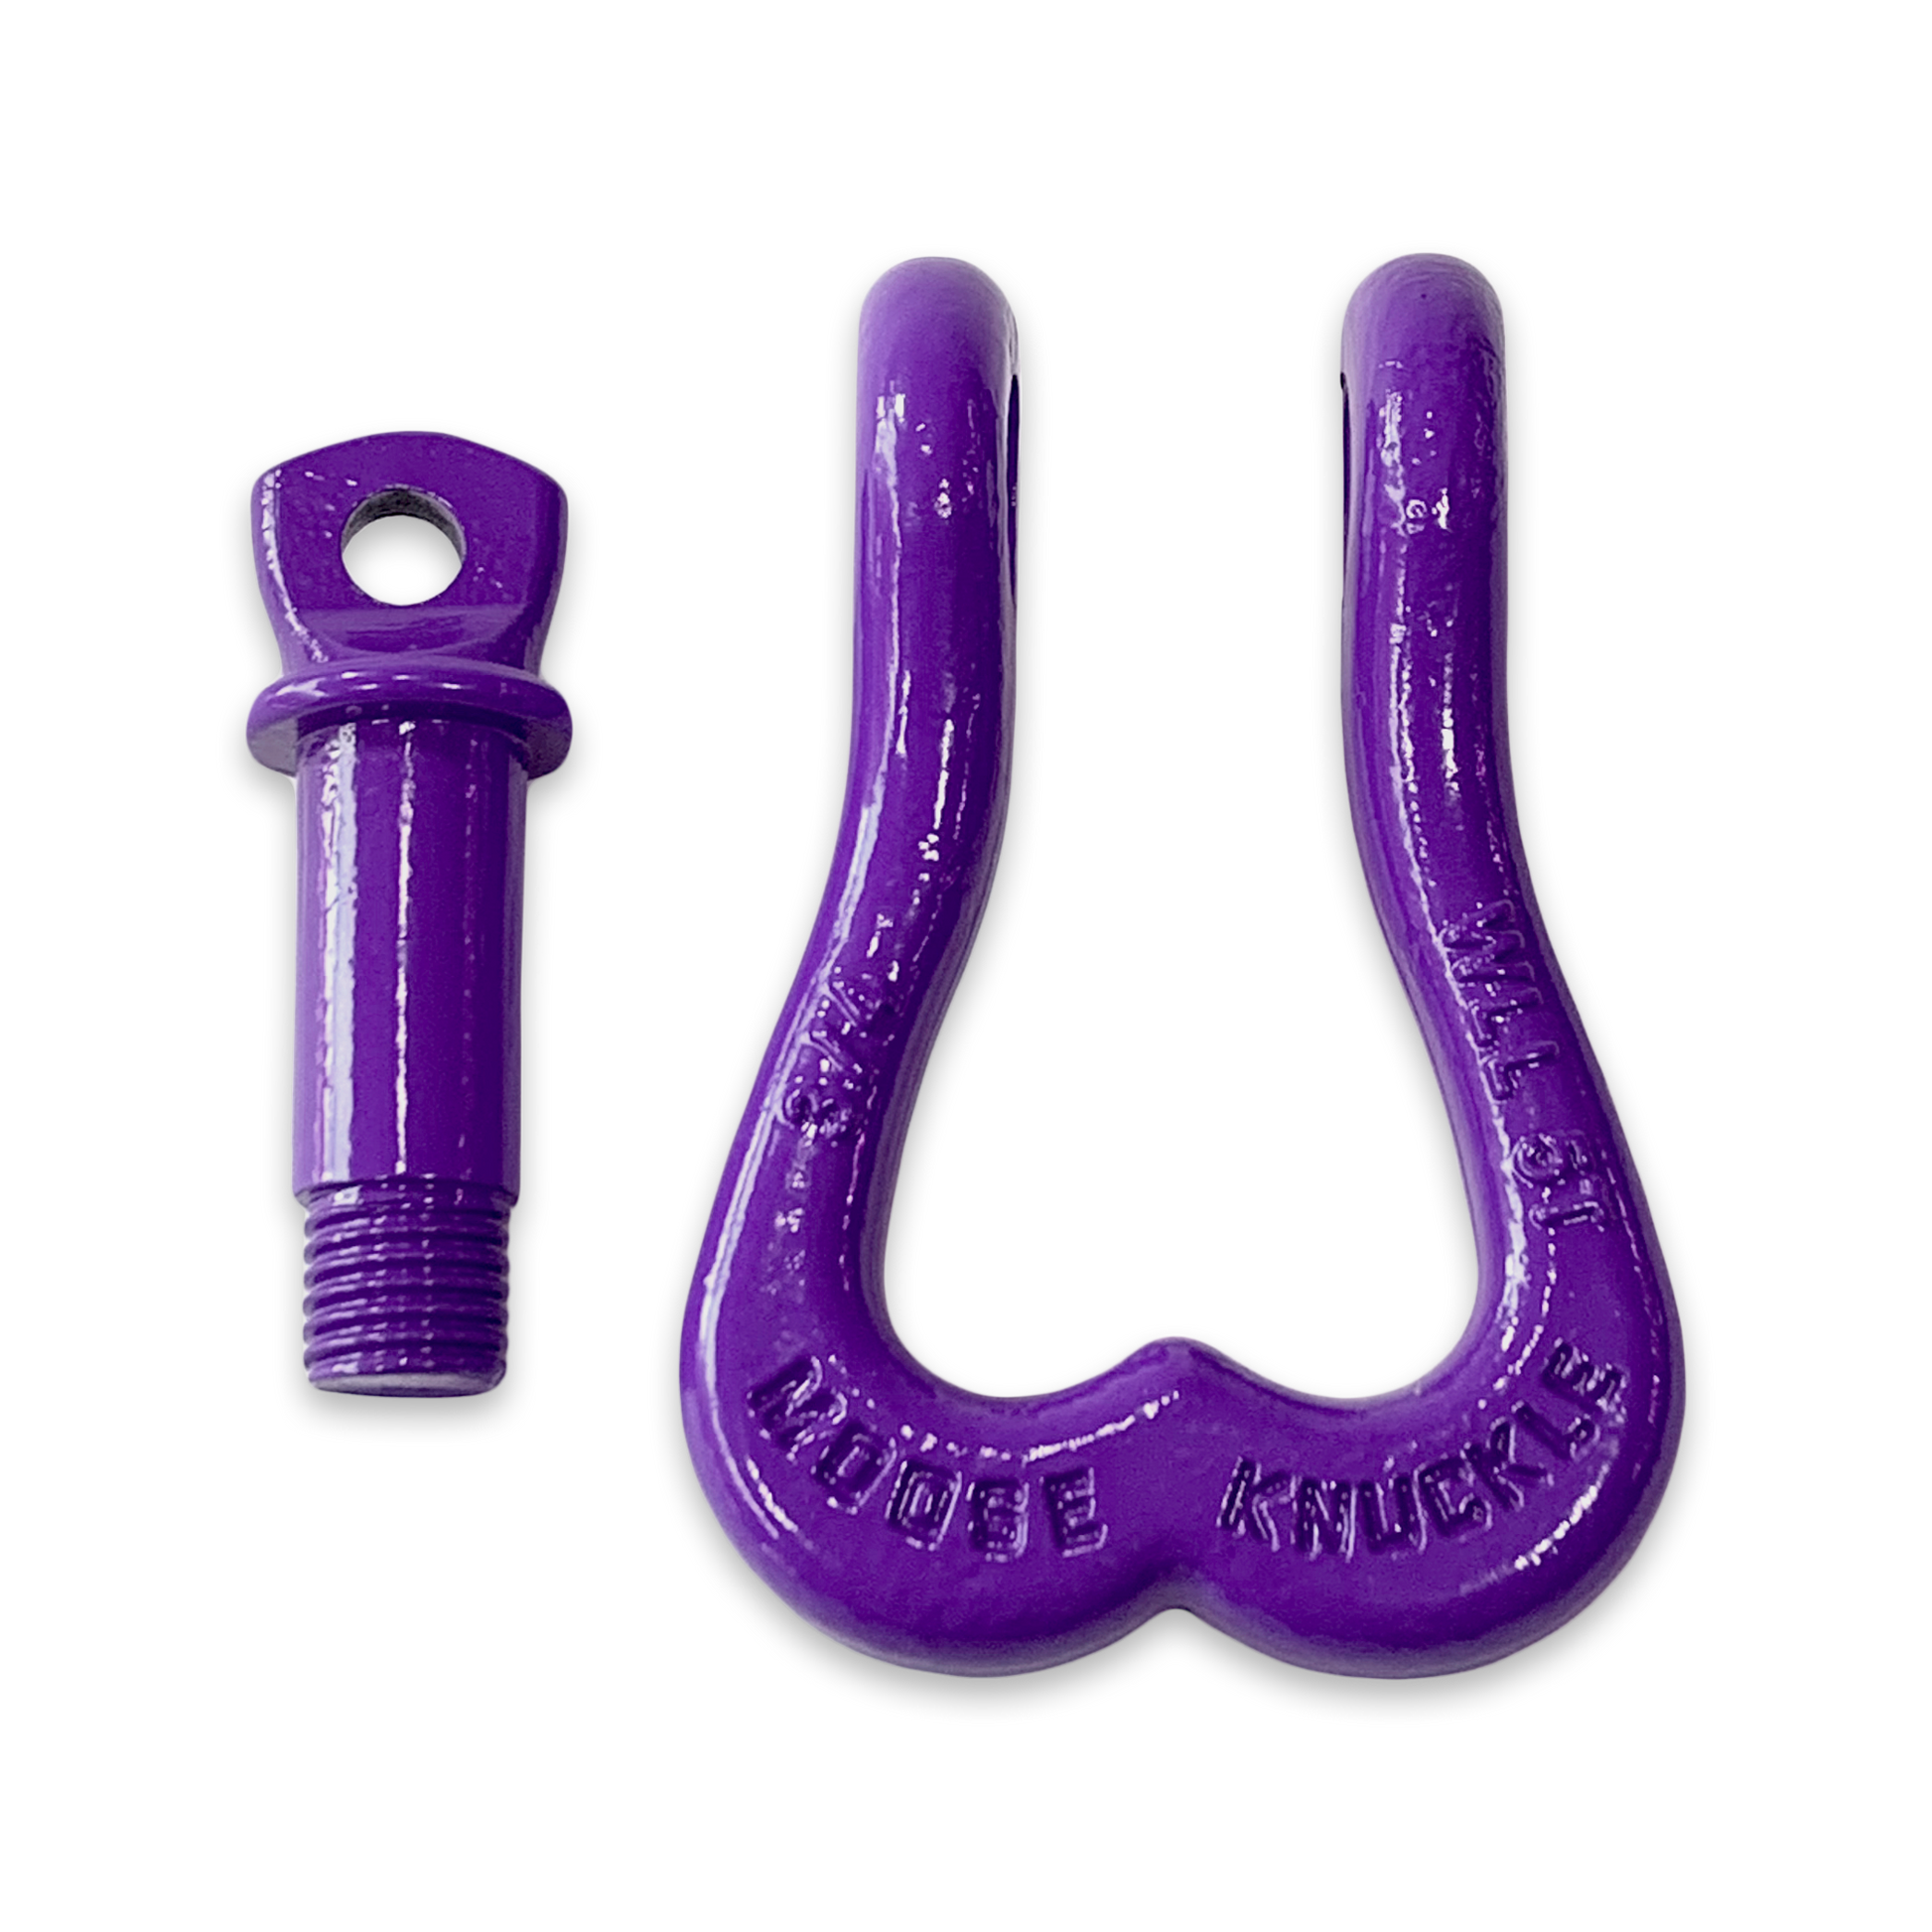 Moose Knuckle XL Grape Escape Purple Heavy Duty Extra Strong Patent Pending 3/4" Shackle for Off-Road Vehicle Recovery to Replace Bull Balls